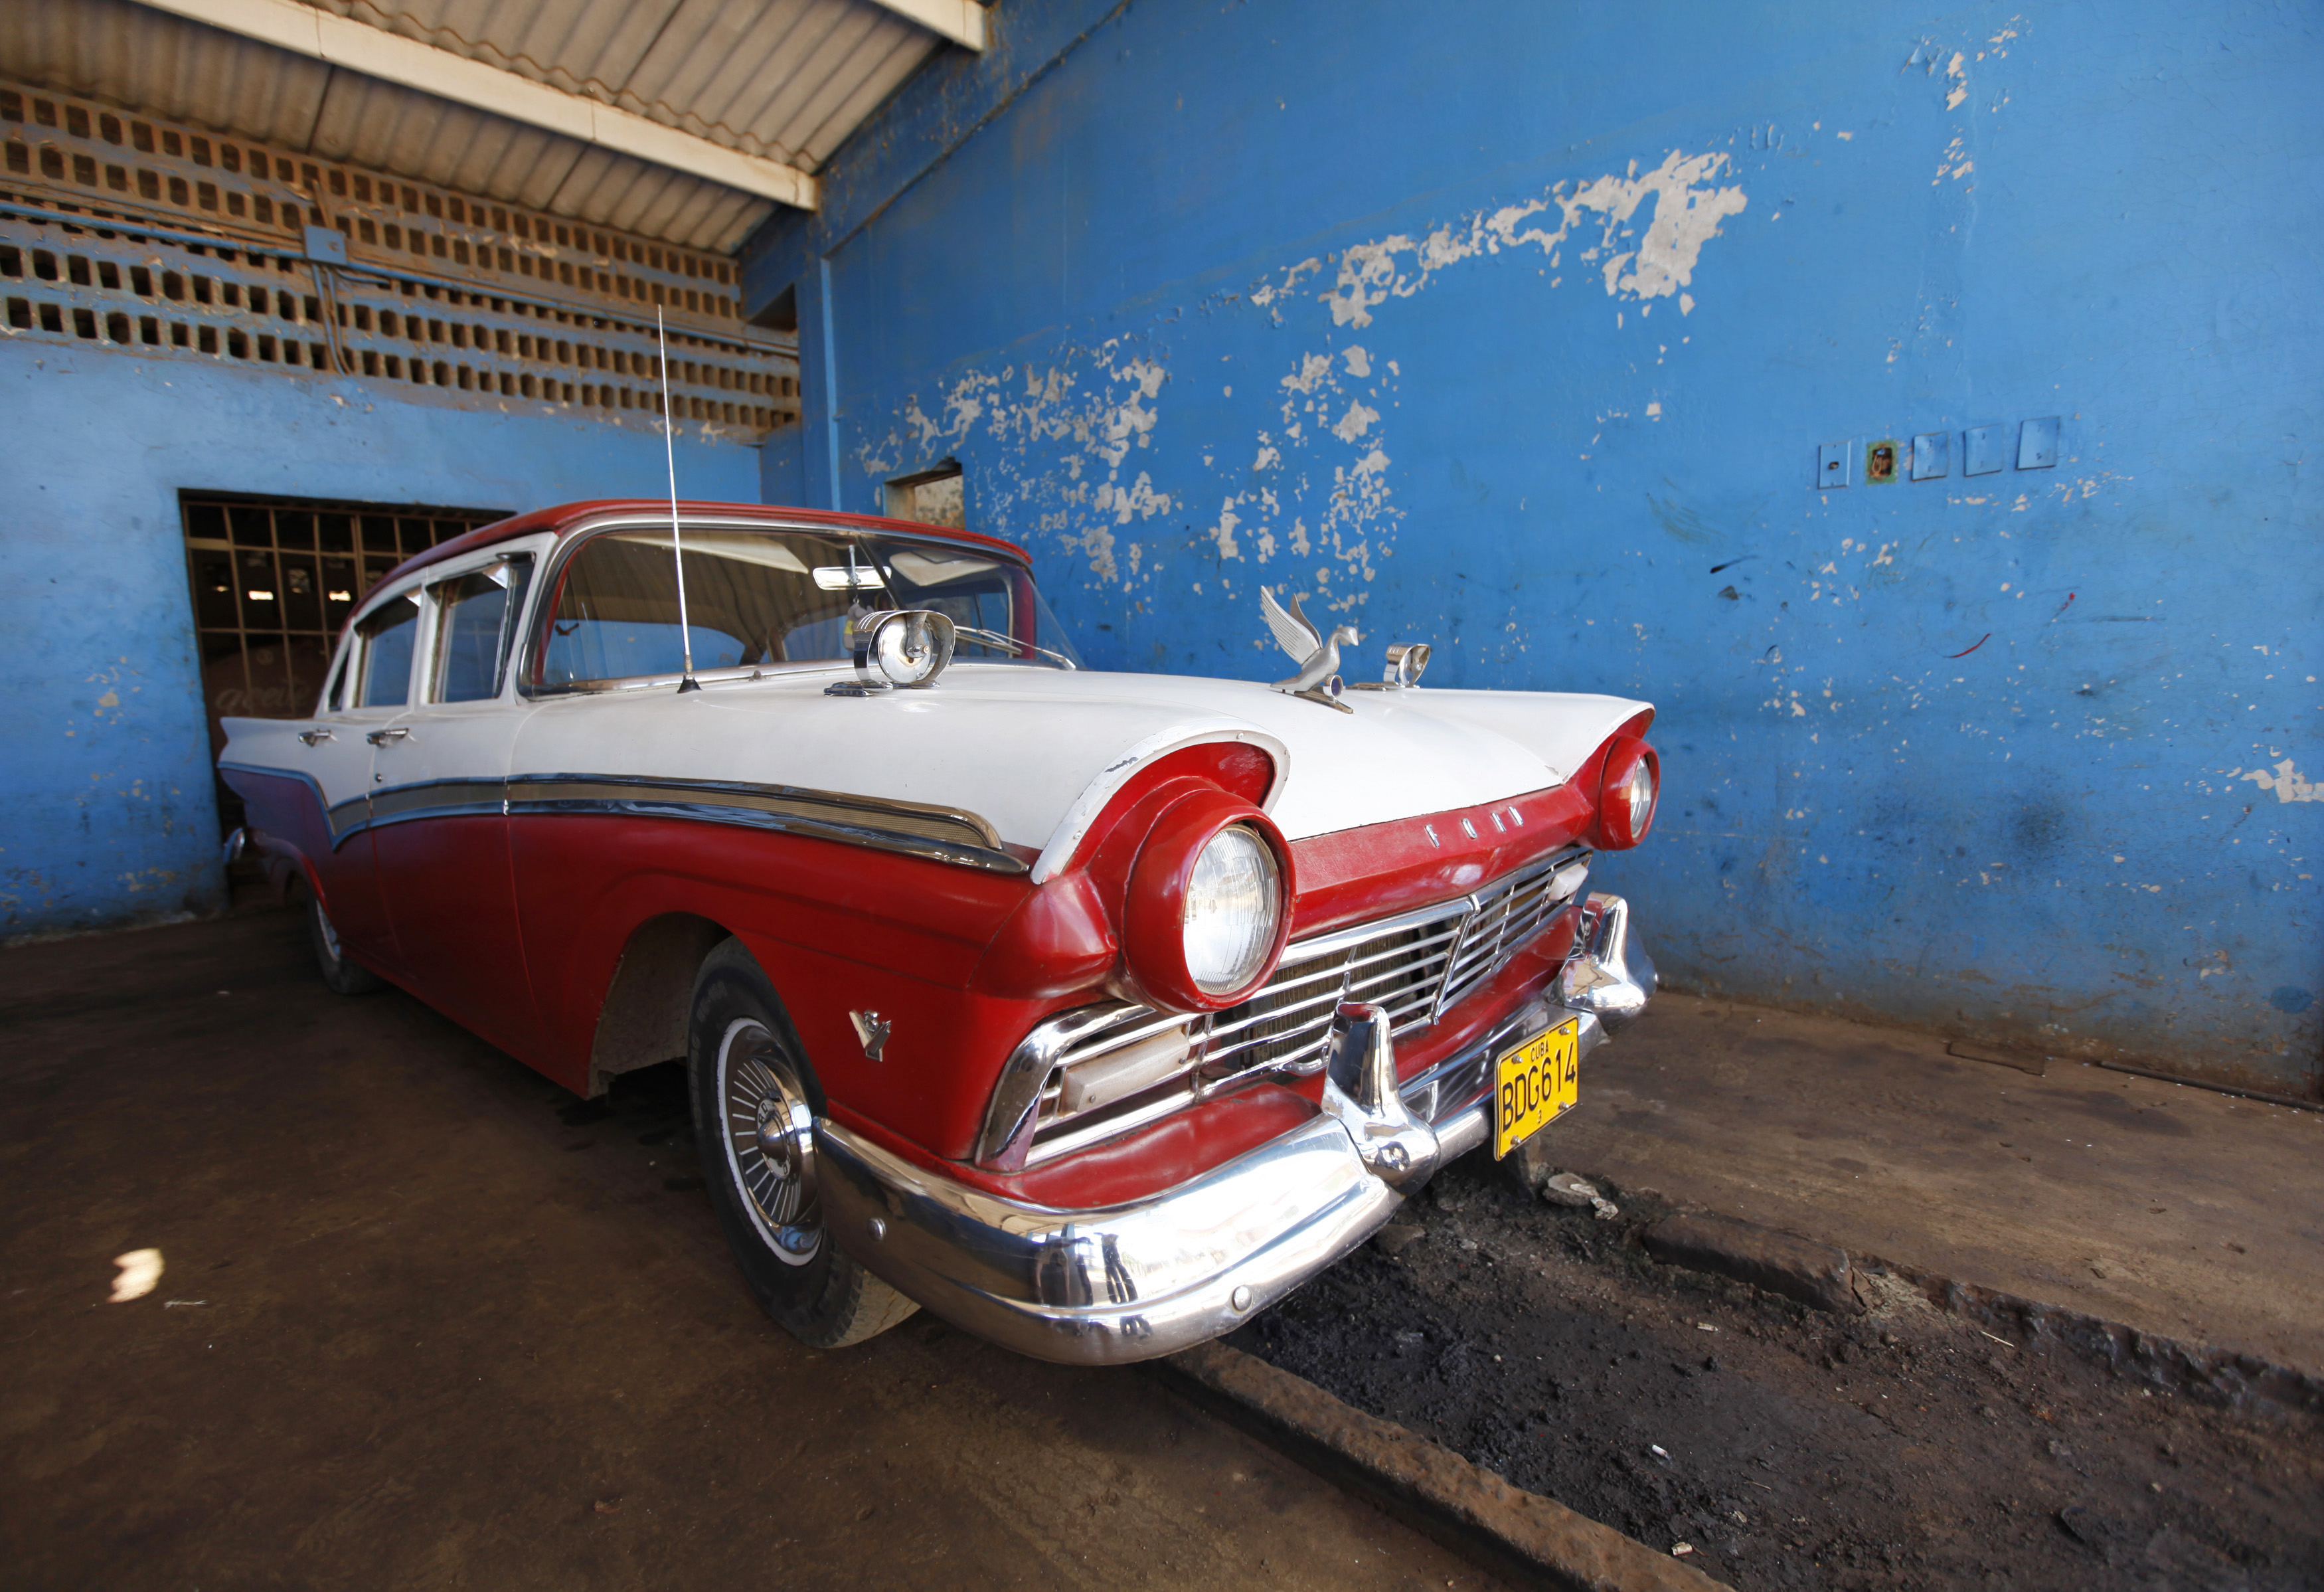 A Ford Motor Company 1954 V8 model car is parked in a garage in the village of Quivican